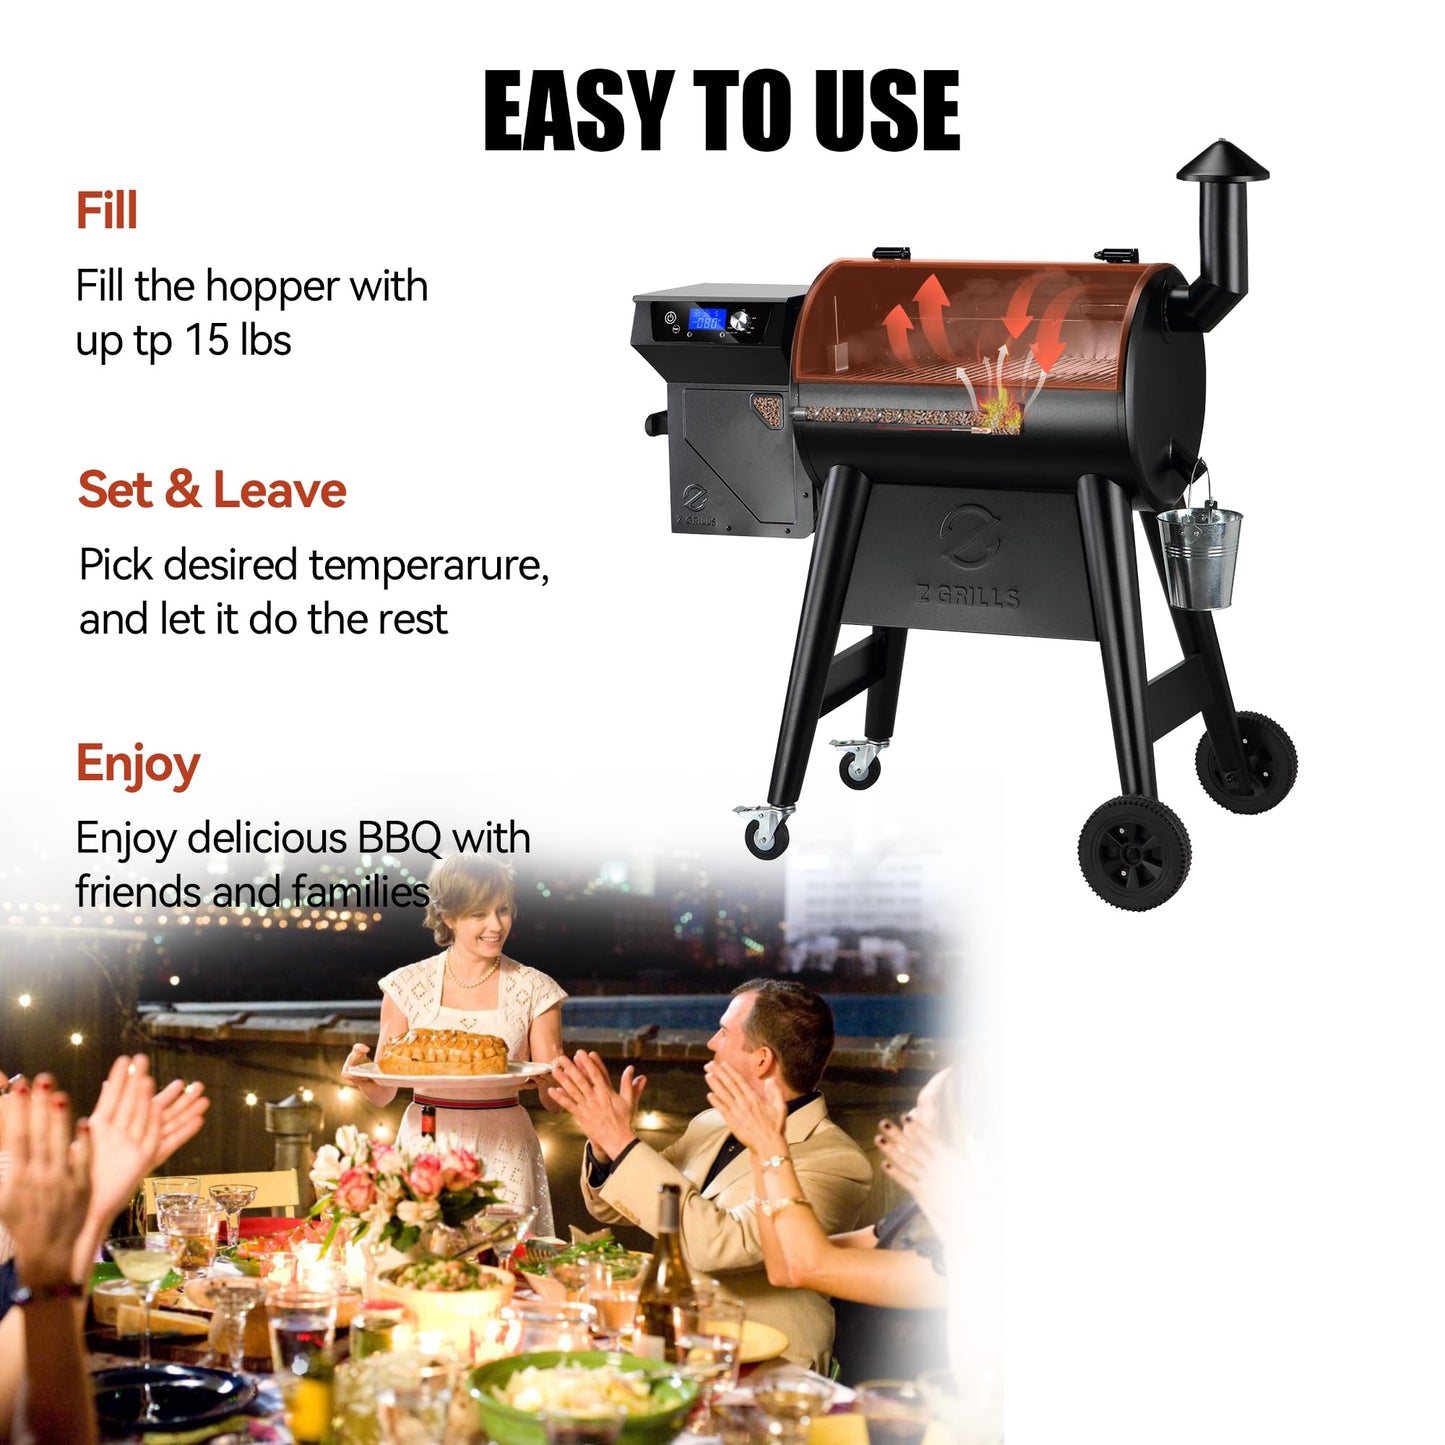 Z GRILLS Newest Pellet Grill Smoker with PID 2.0 Controller, Meat Probes, Rain Cover for Outdoor BBQ, 450E